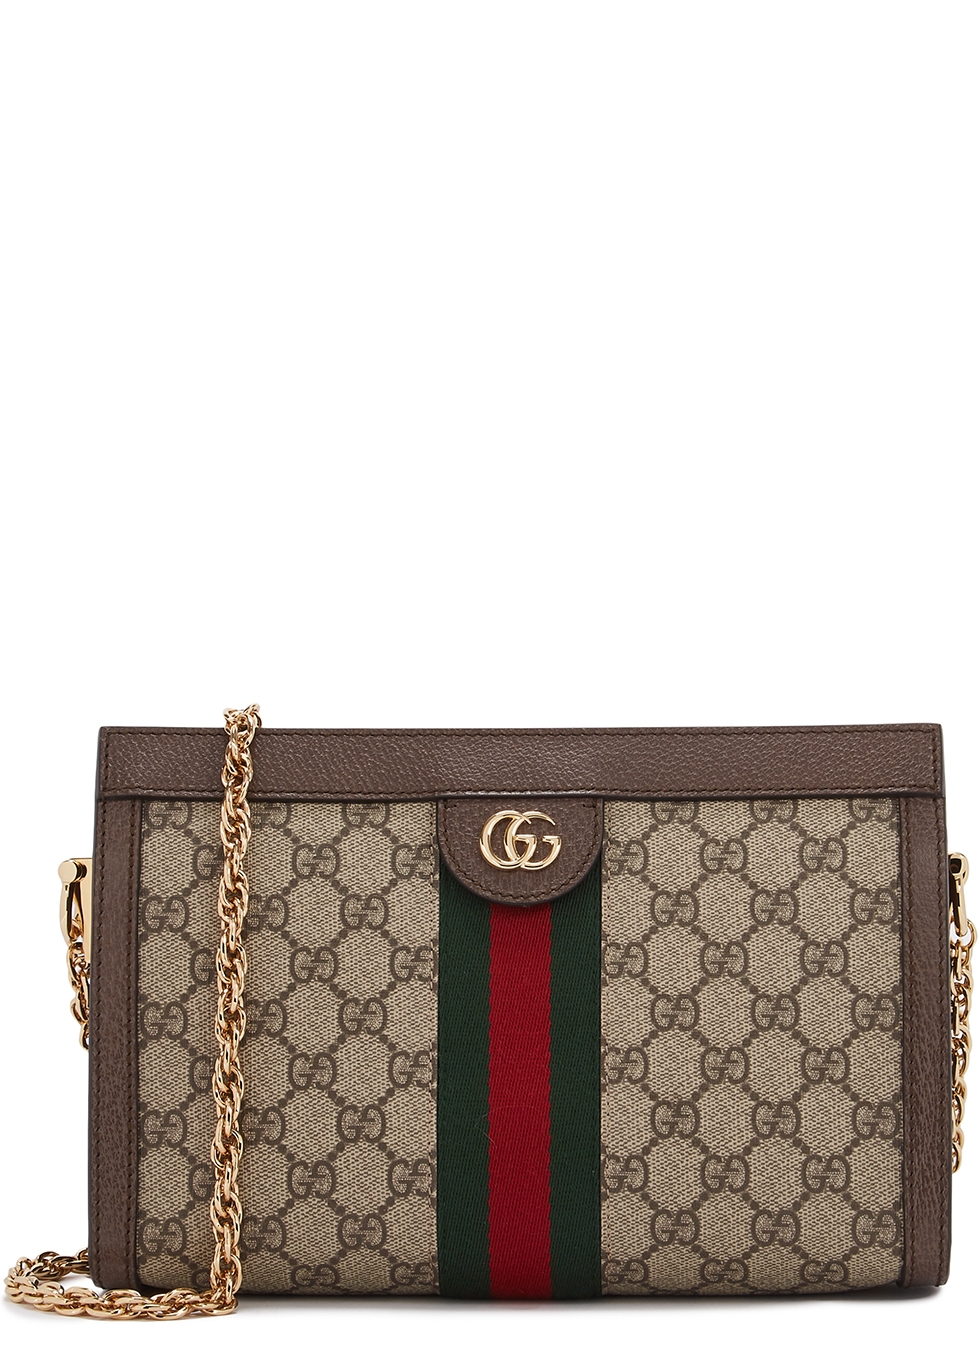 Gucci Ophidia GG small monogrammed 